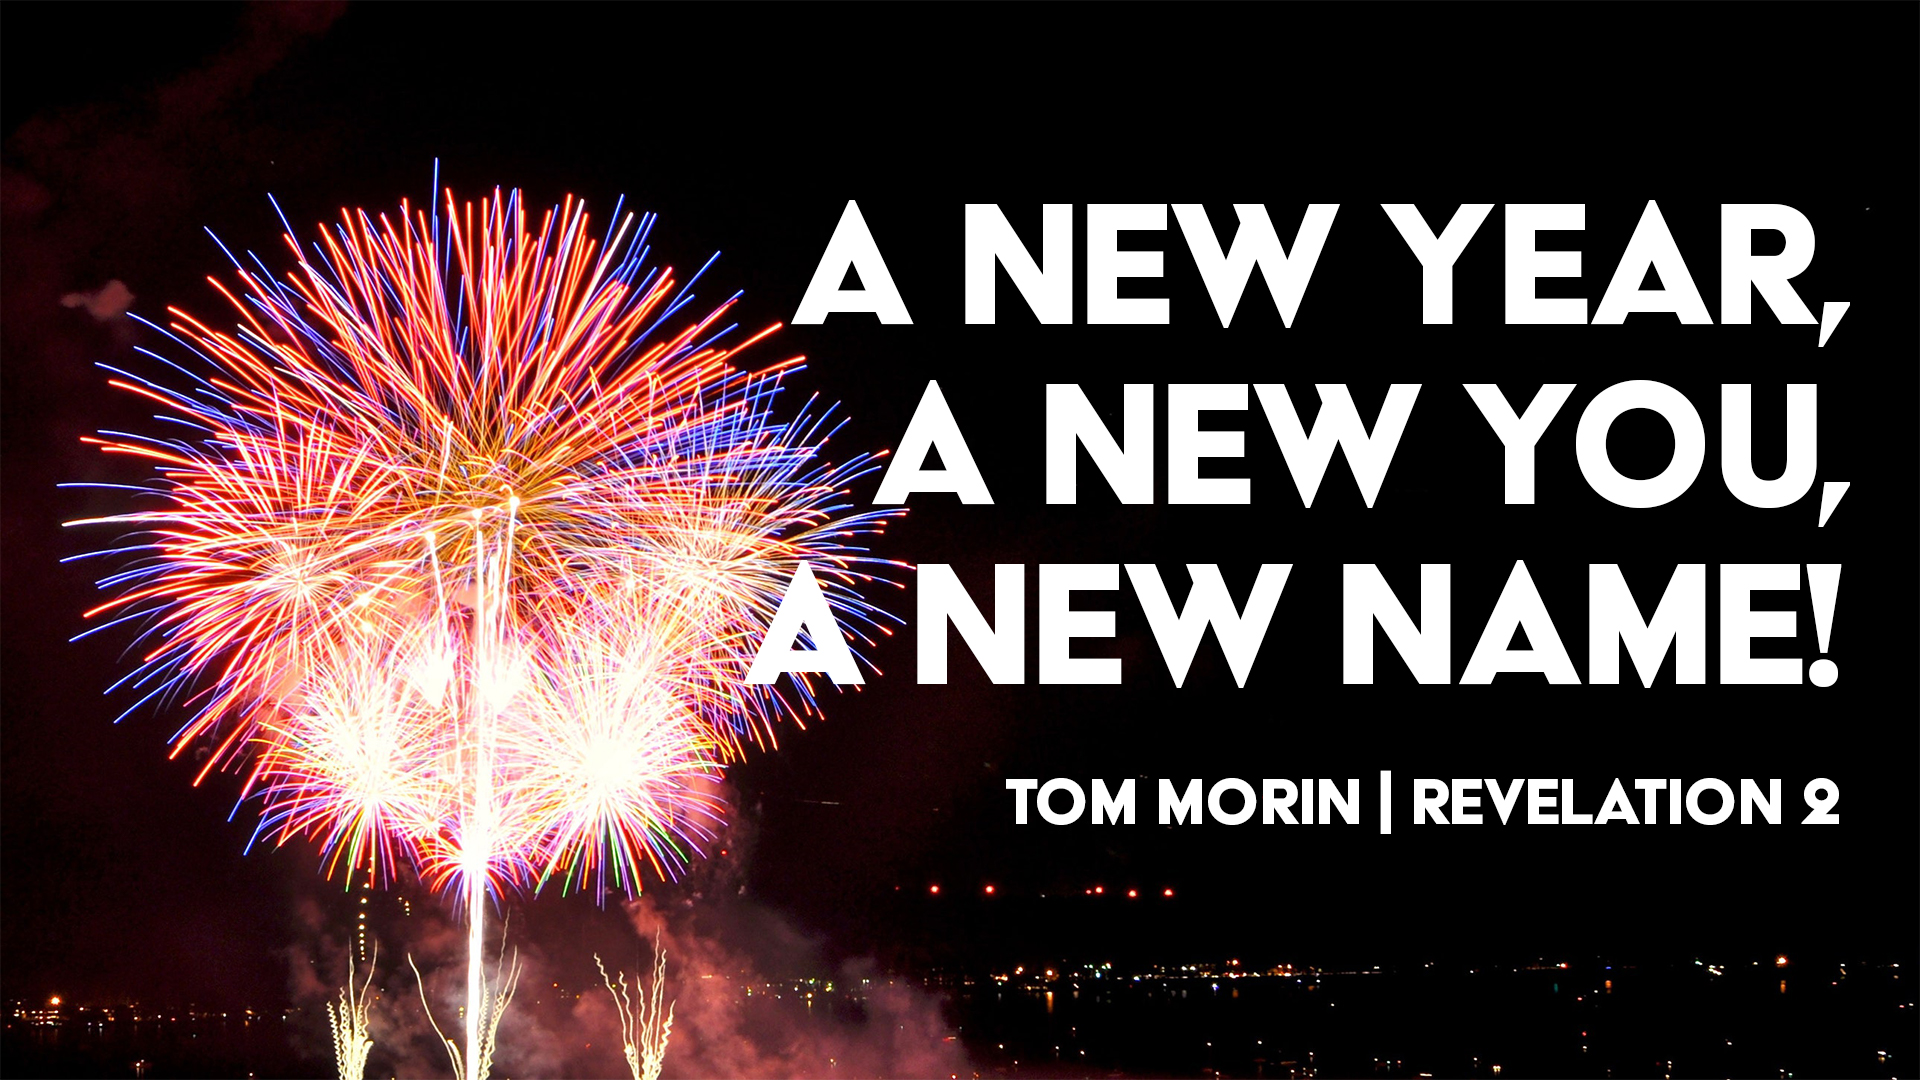 A New Year, A New You, A New Name!